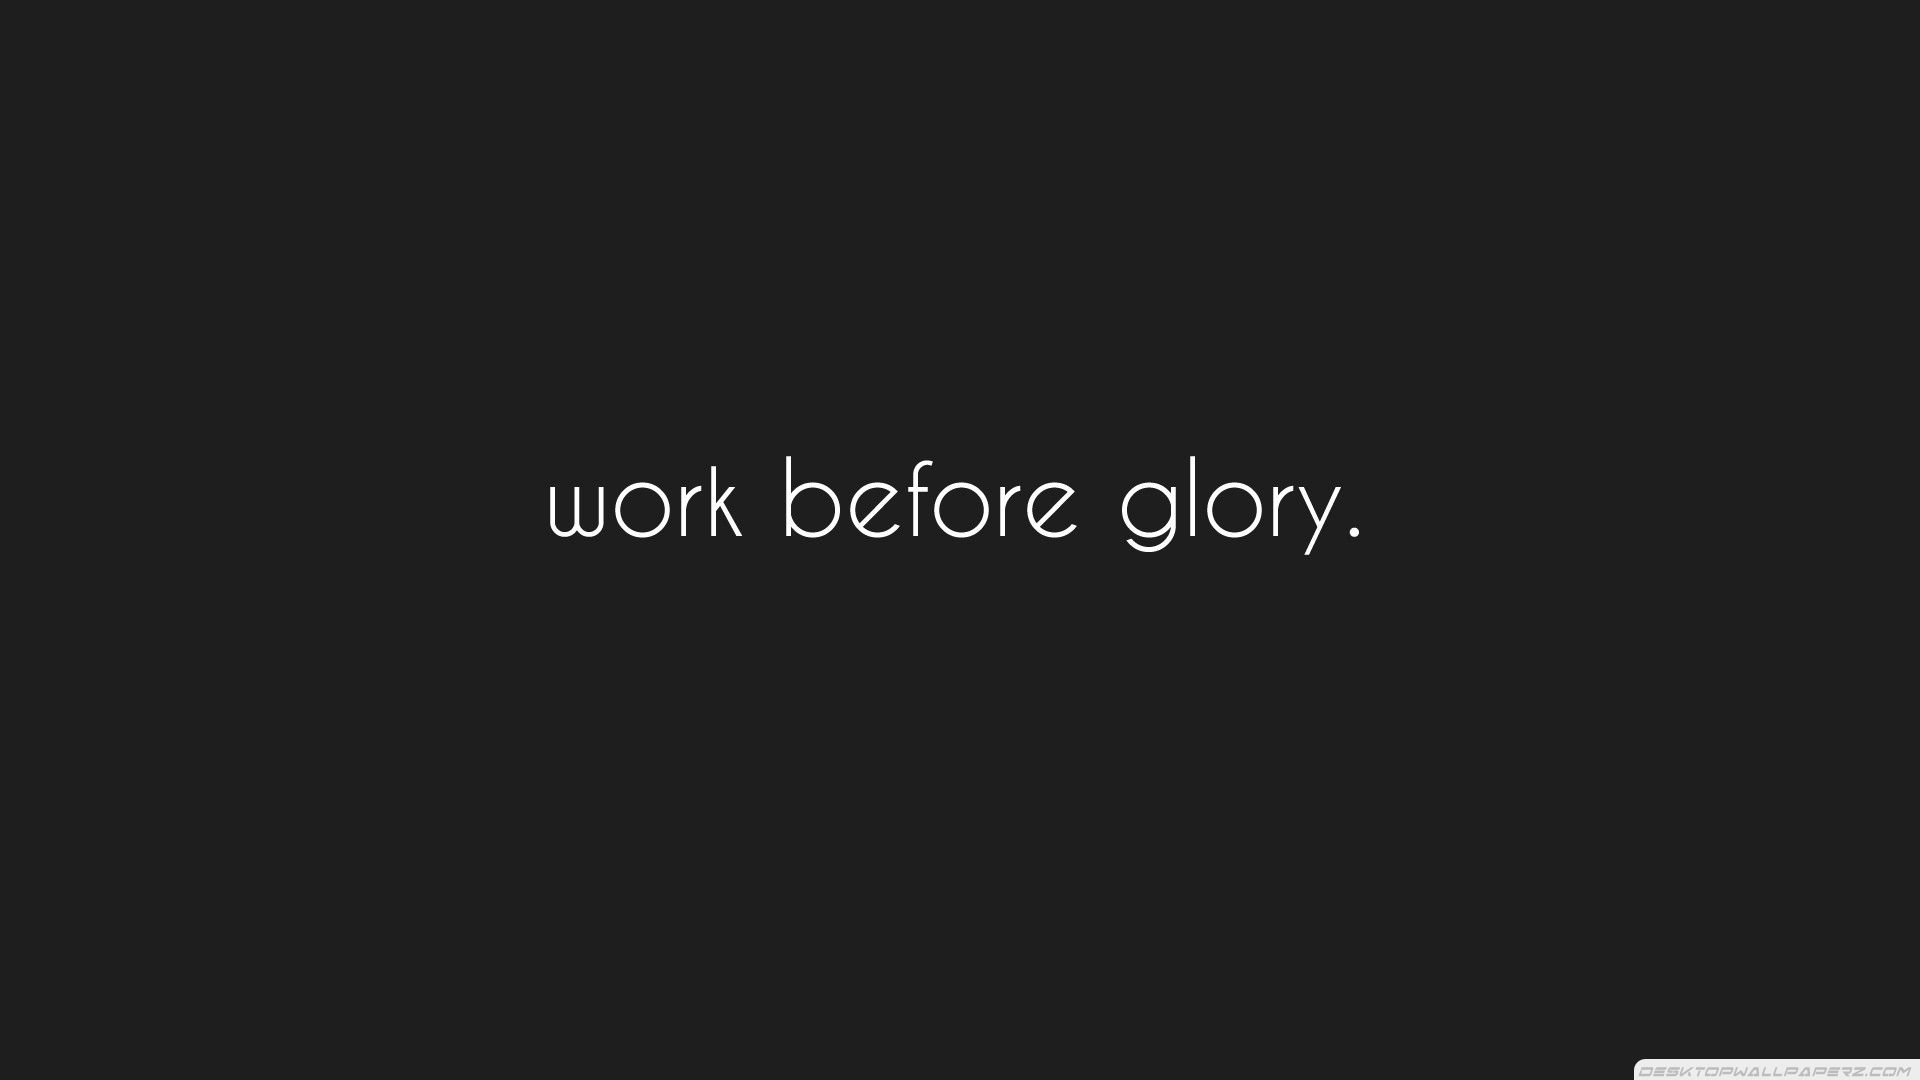 Quotes Inspire Work Glory 19201080 33932 HD Wallpaper Res